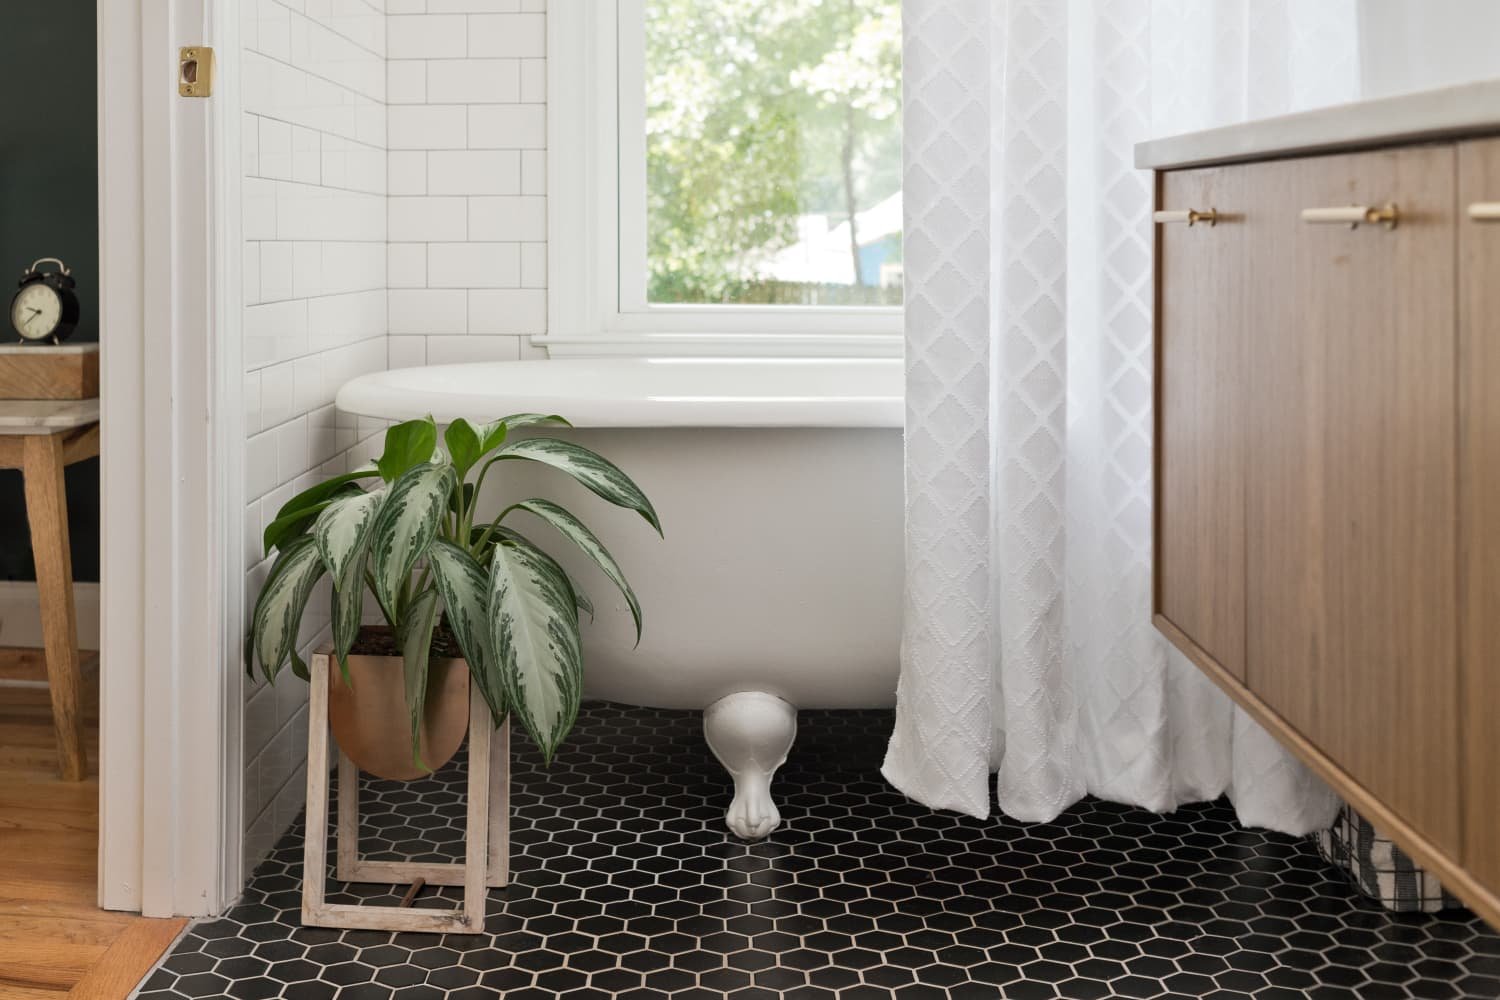 10 Quick Steps to a Cleaner Bathroom, Both Inside and Out